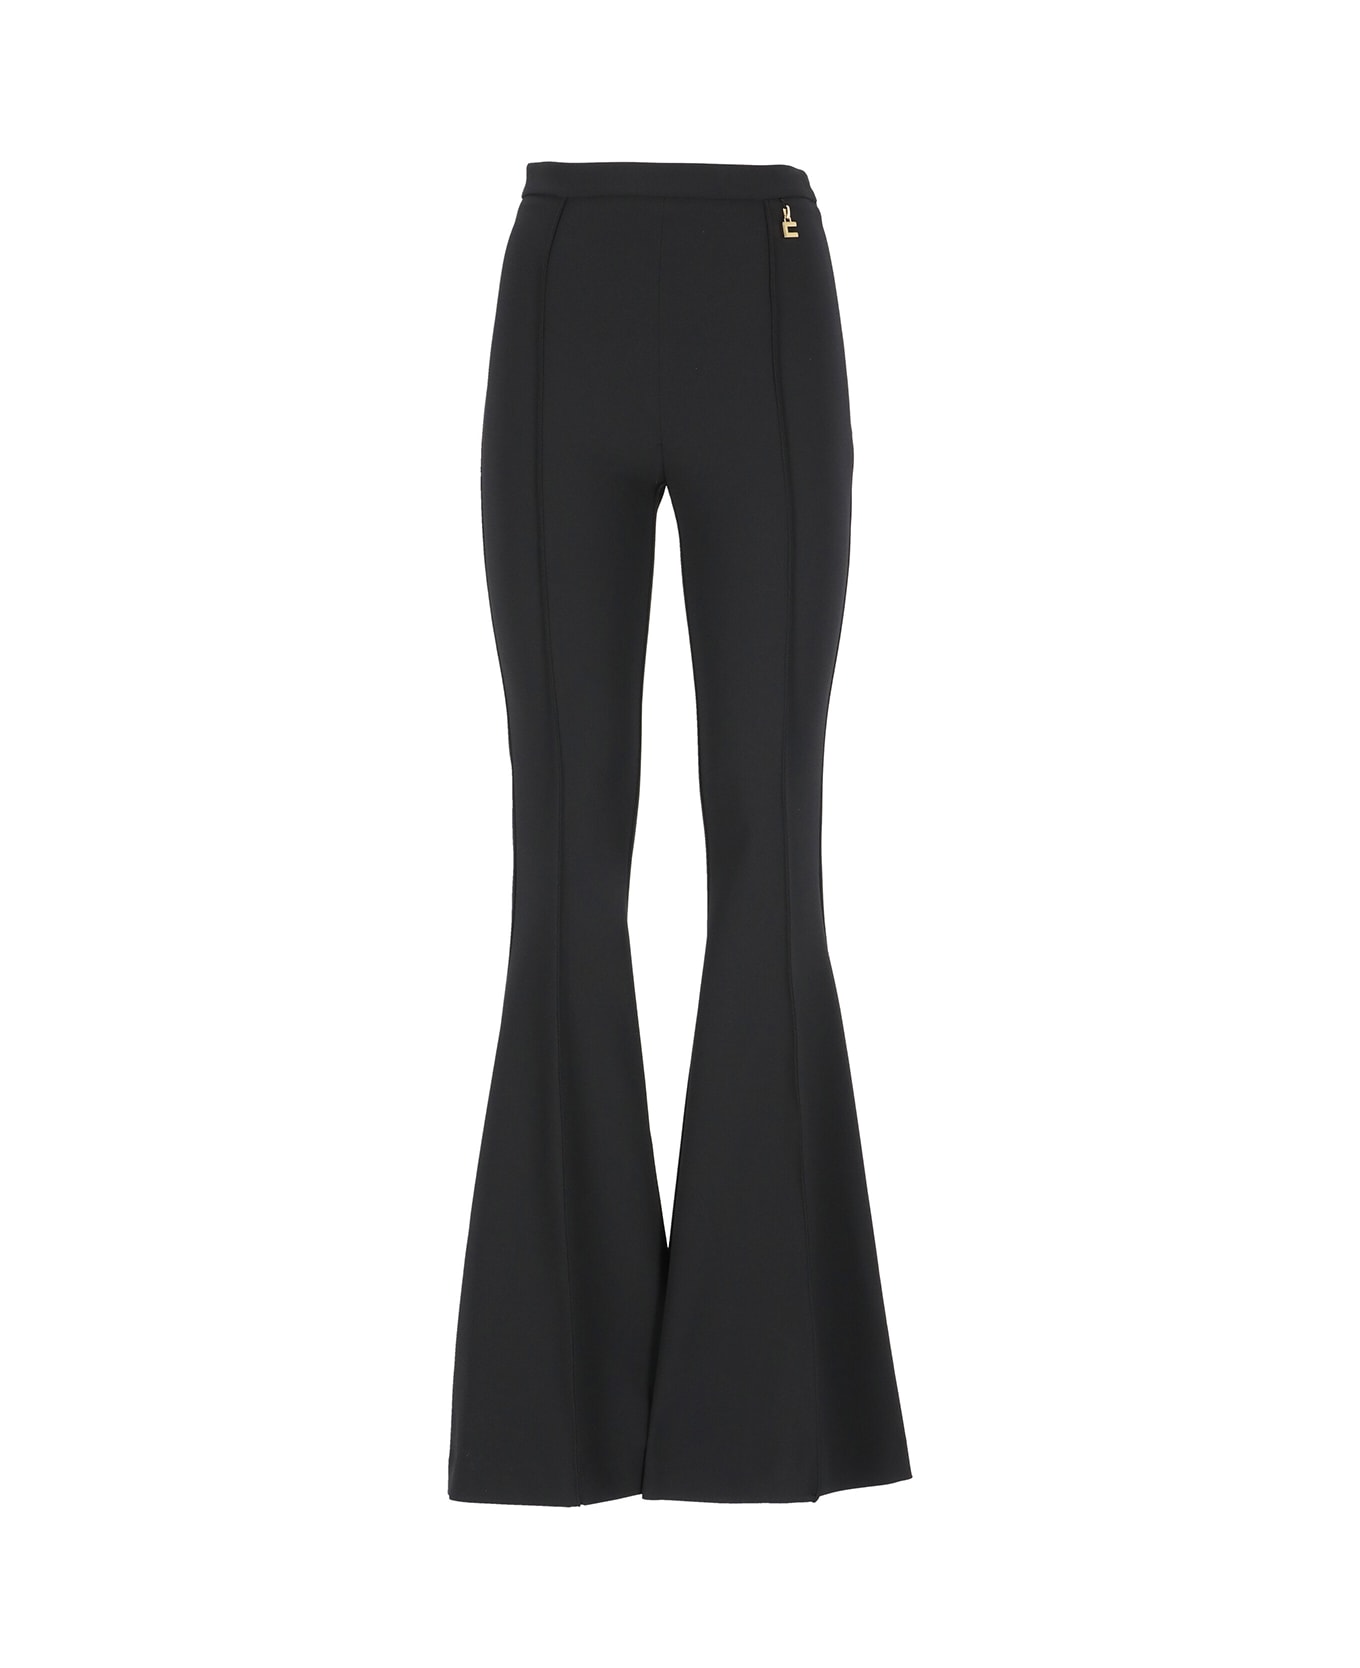 Elisabetta Franchi Flared Trousers With Charms Accessory - Black